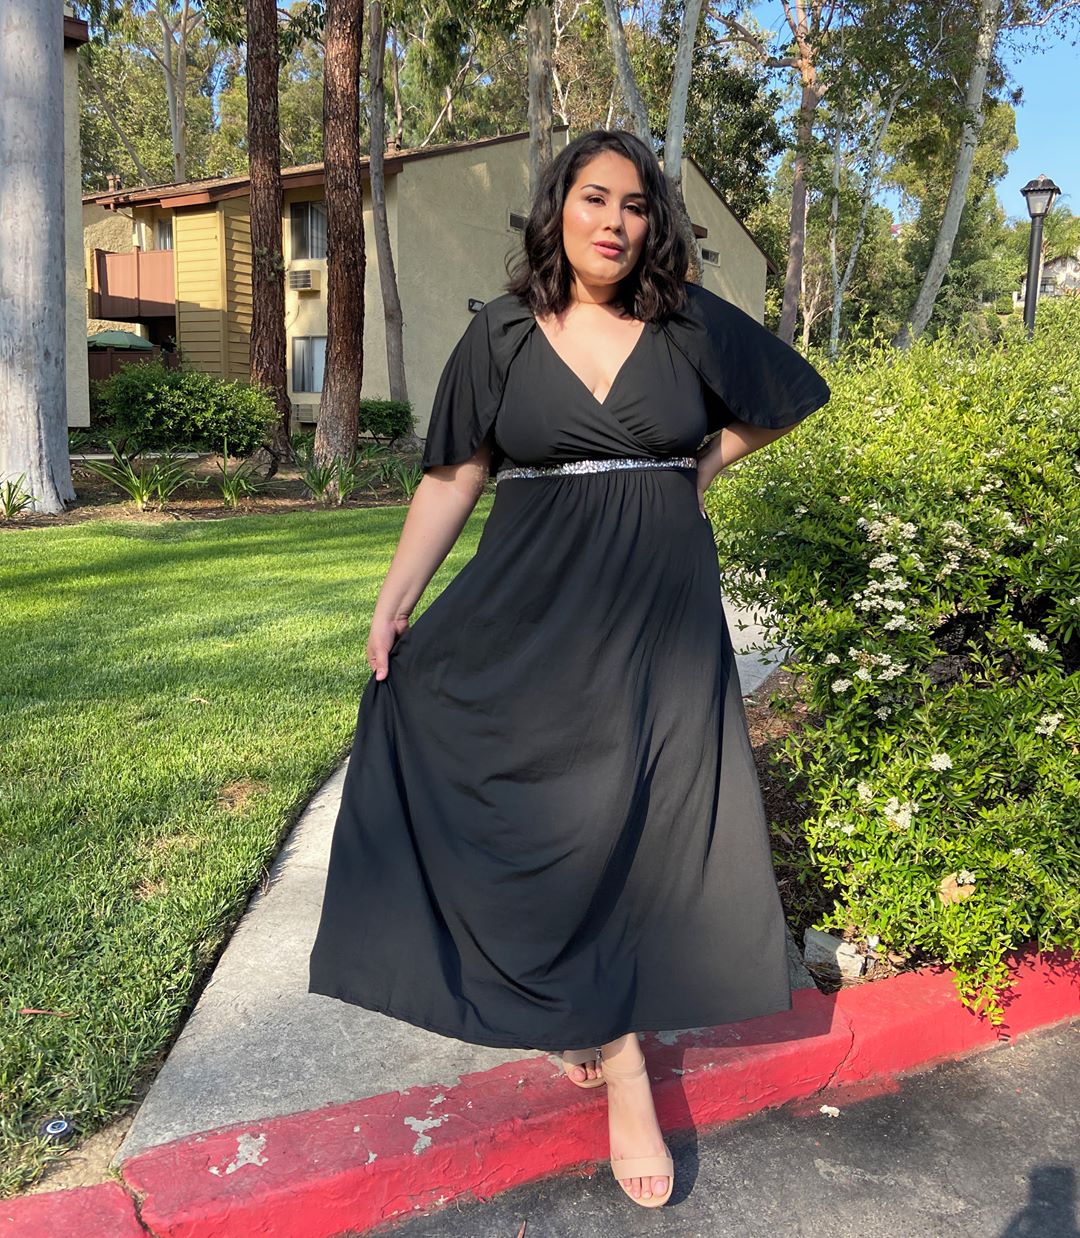 Rosegal - Search "dress" on Rosegal.com, you  will get more surprise!⁣
Shop via the bio link.⁣
⁣
Use code: RGH20 to Enjoy 18% off!⁣
#rosegal #plussizefashion #Rosegalcurvygirl #curvygirl